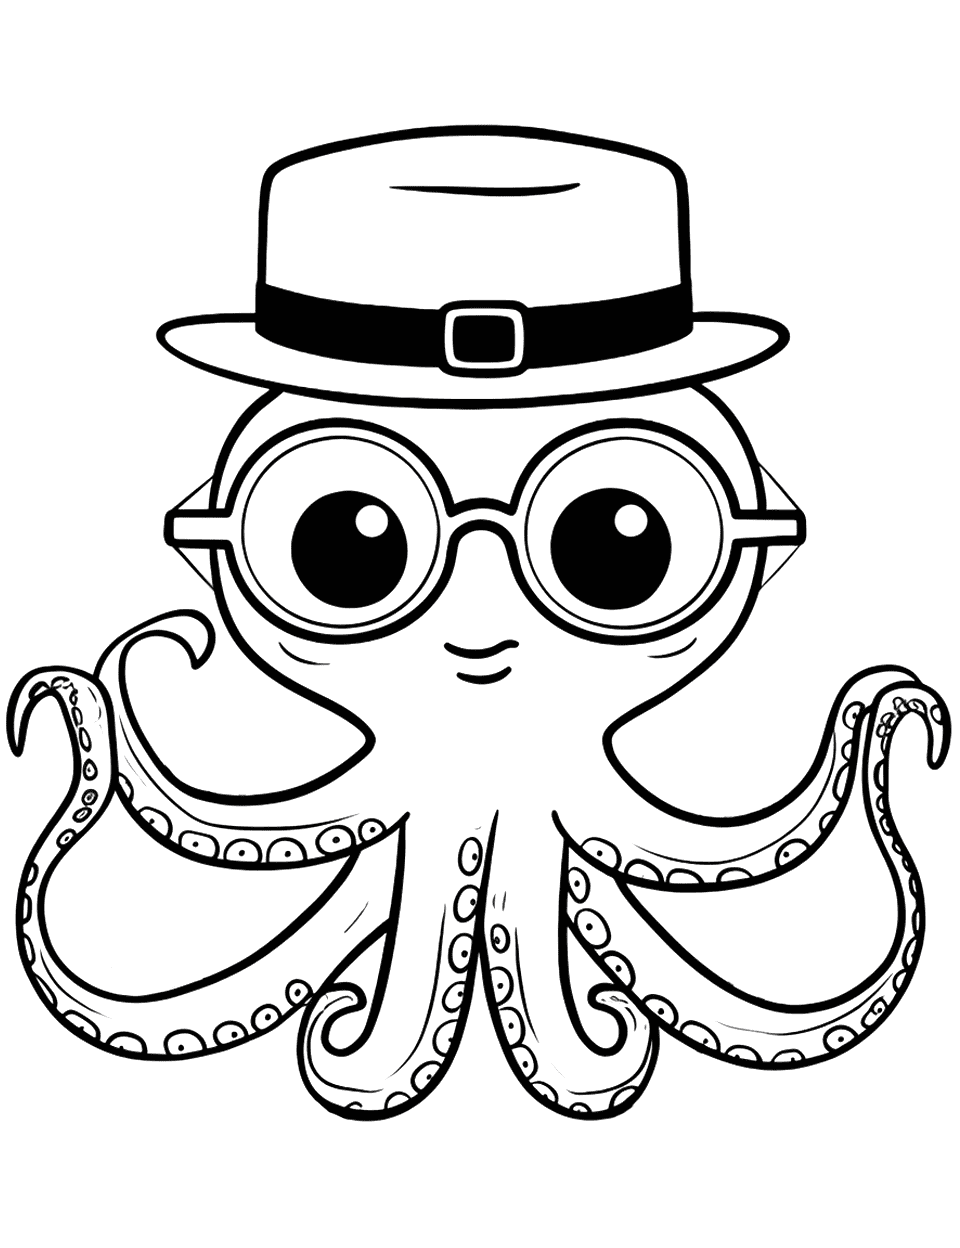 Octopus Detective Coloring Page - An octopus dressed as a detective.